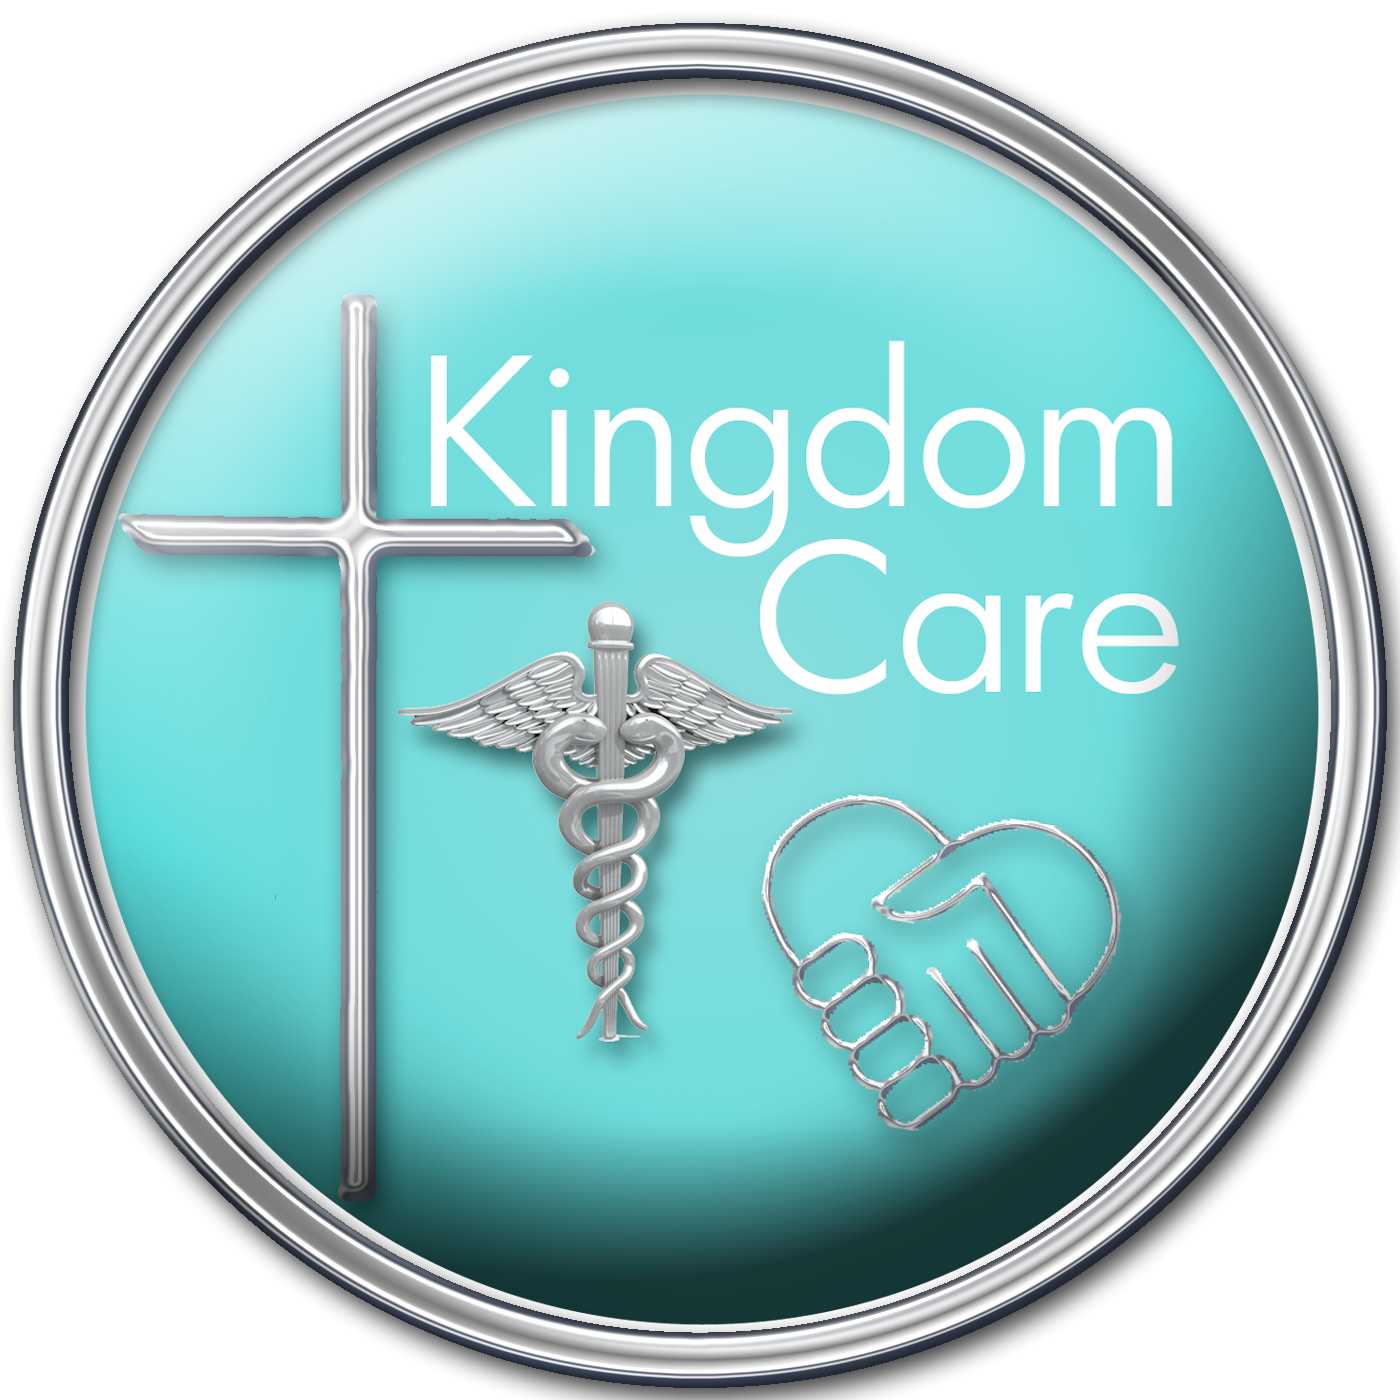 Kingdom Care Medical, Dental and Vision Care Clinic